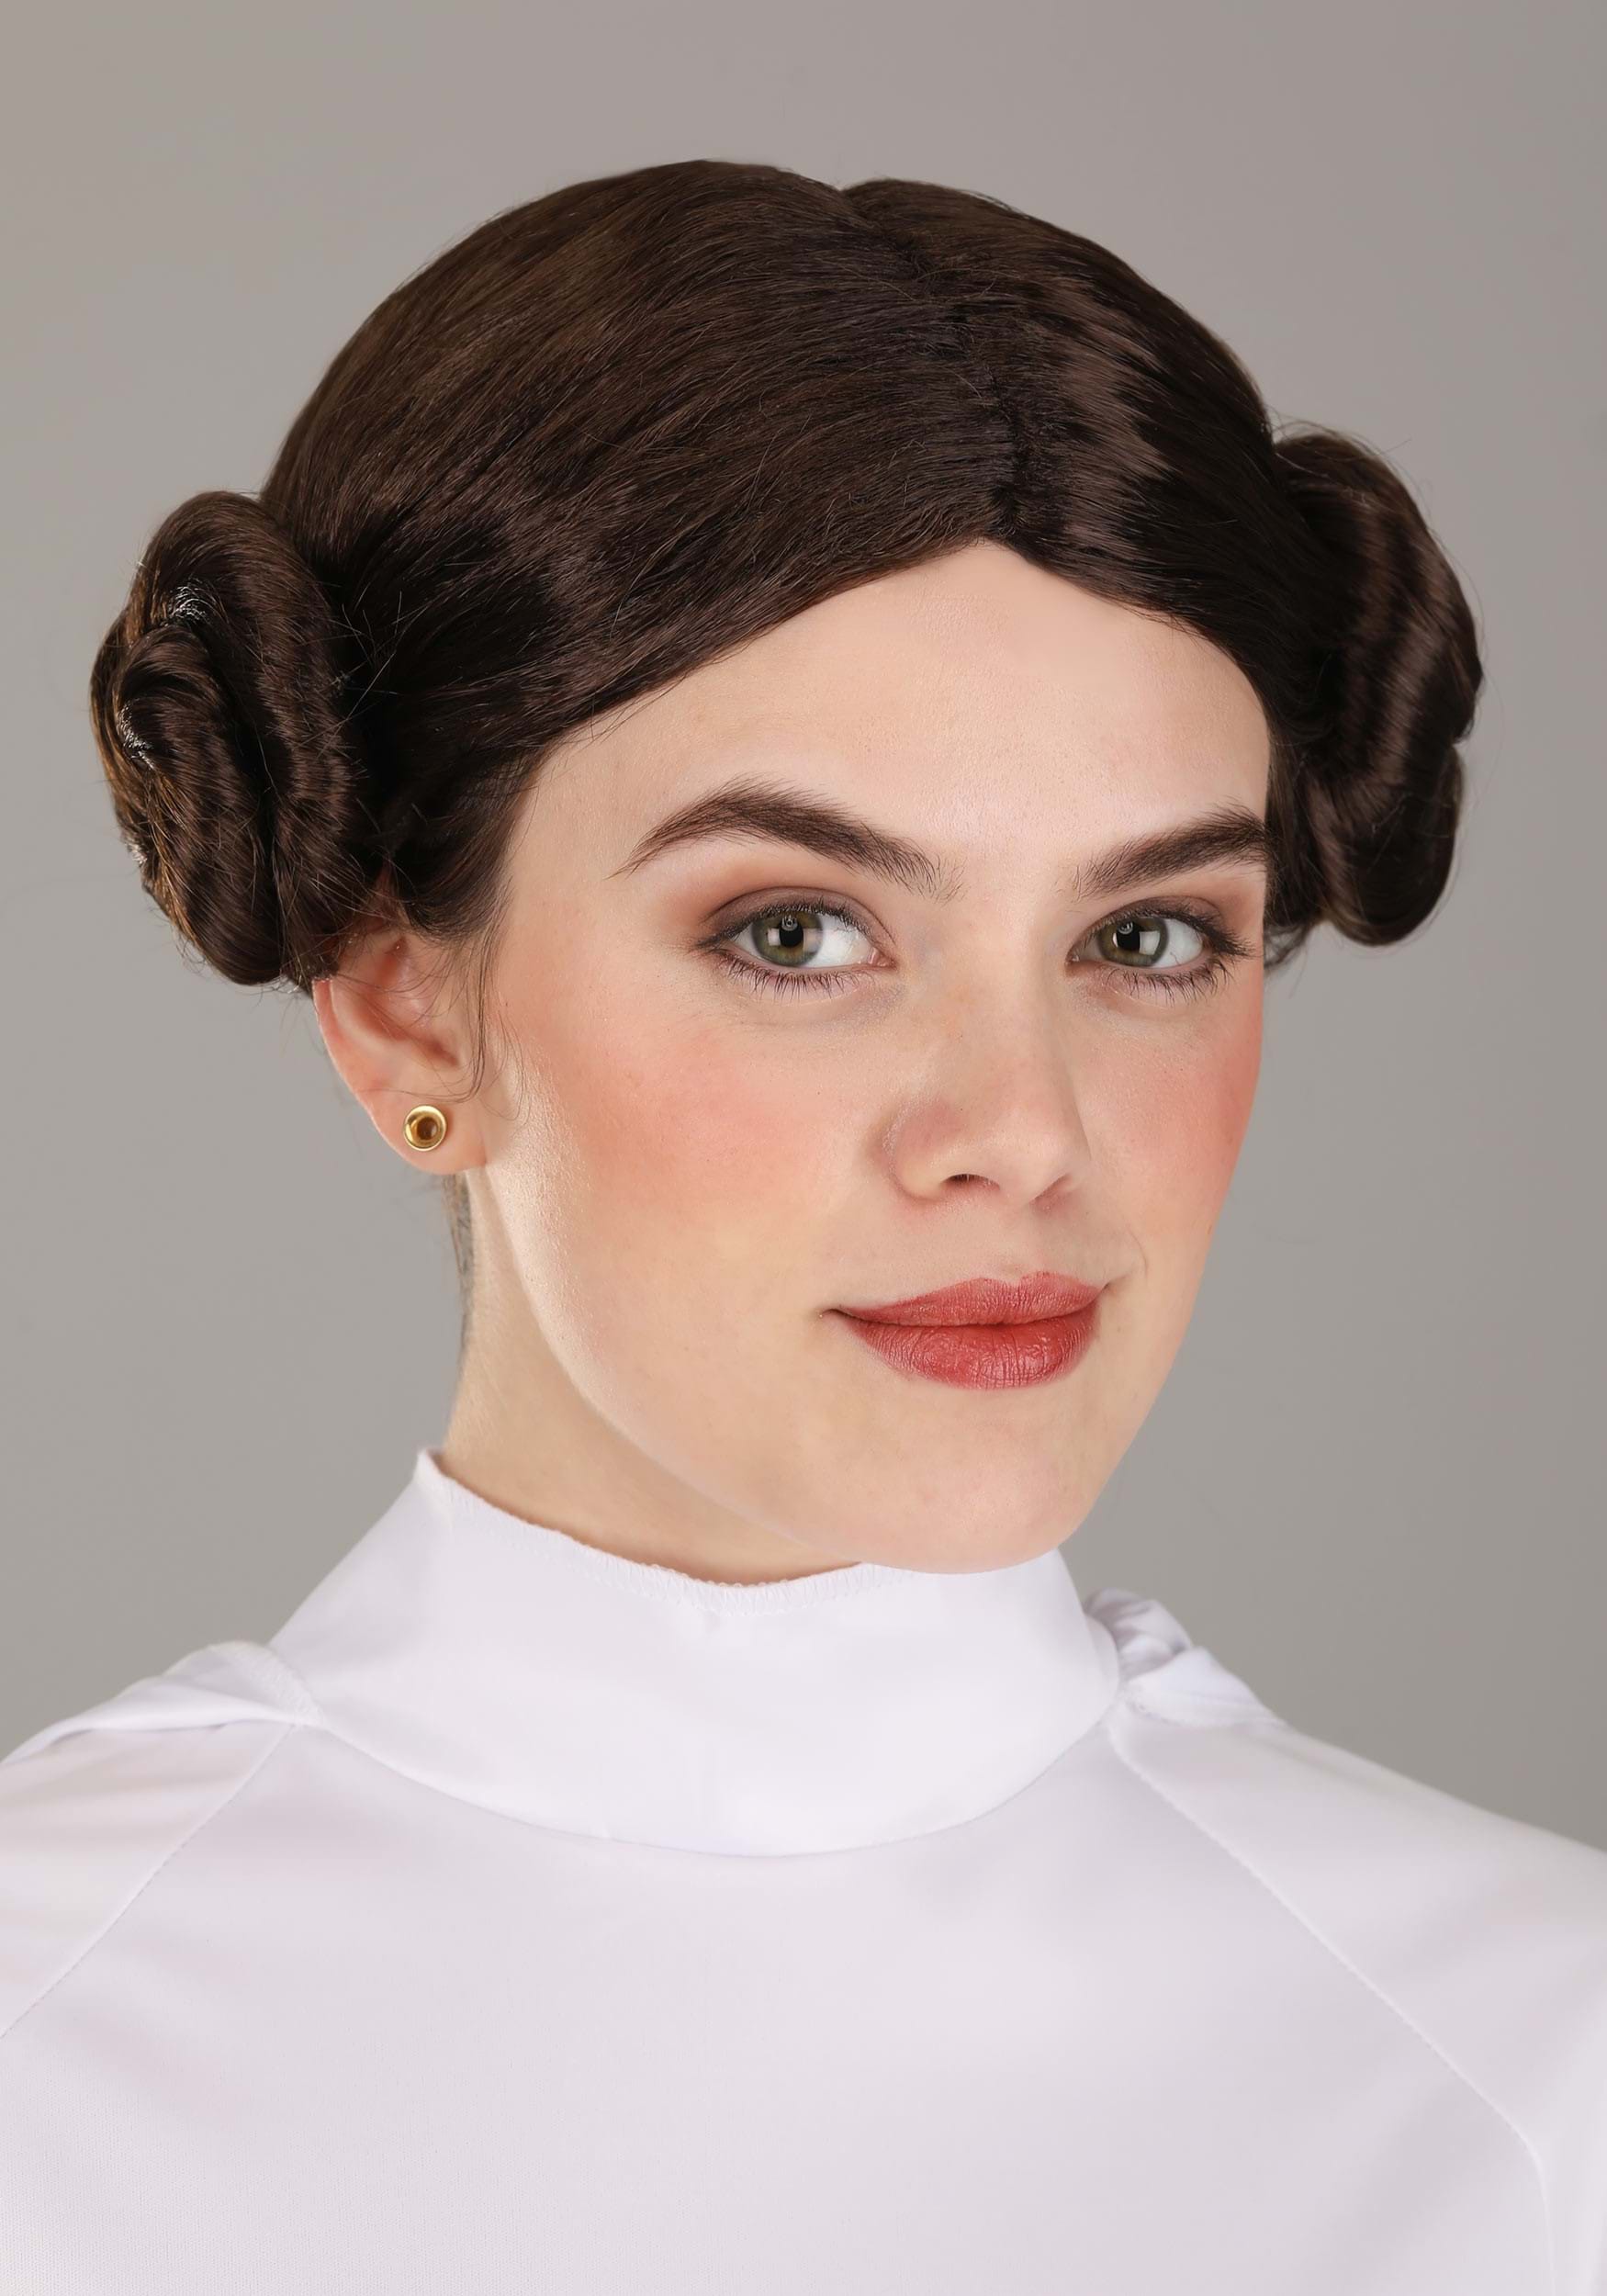 Princess Leia Hooded Costume For Adults